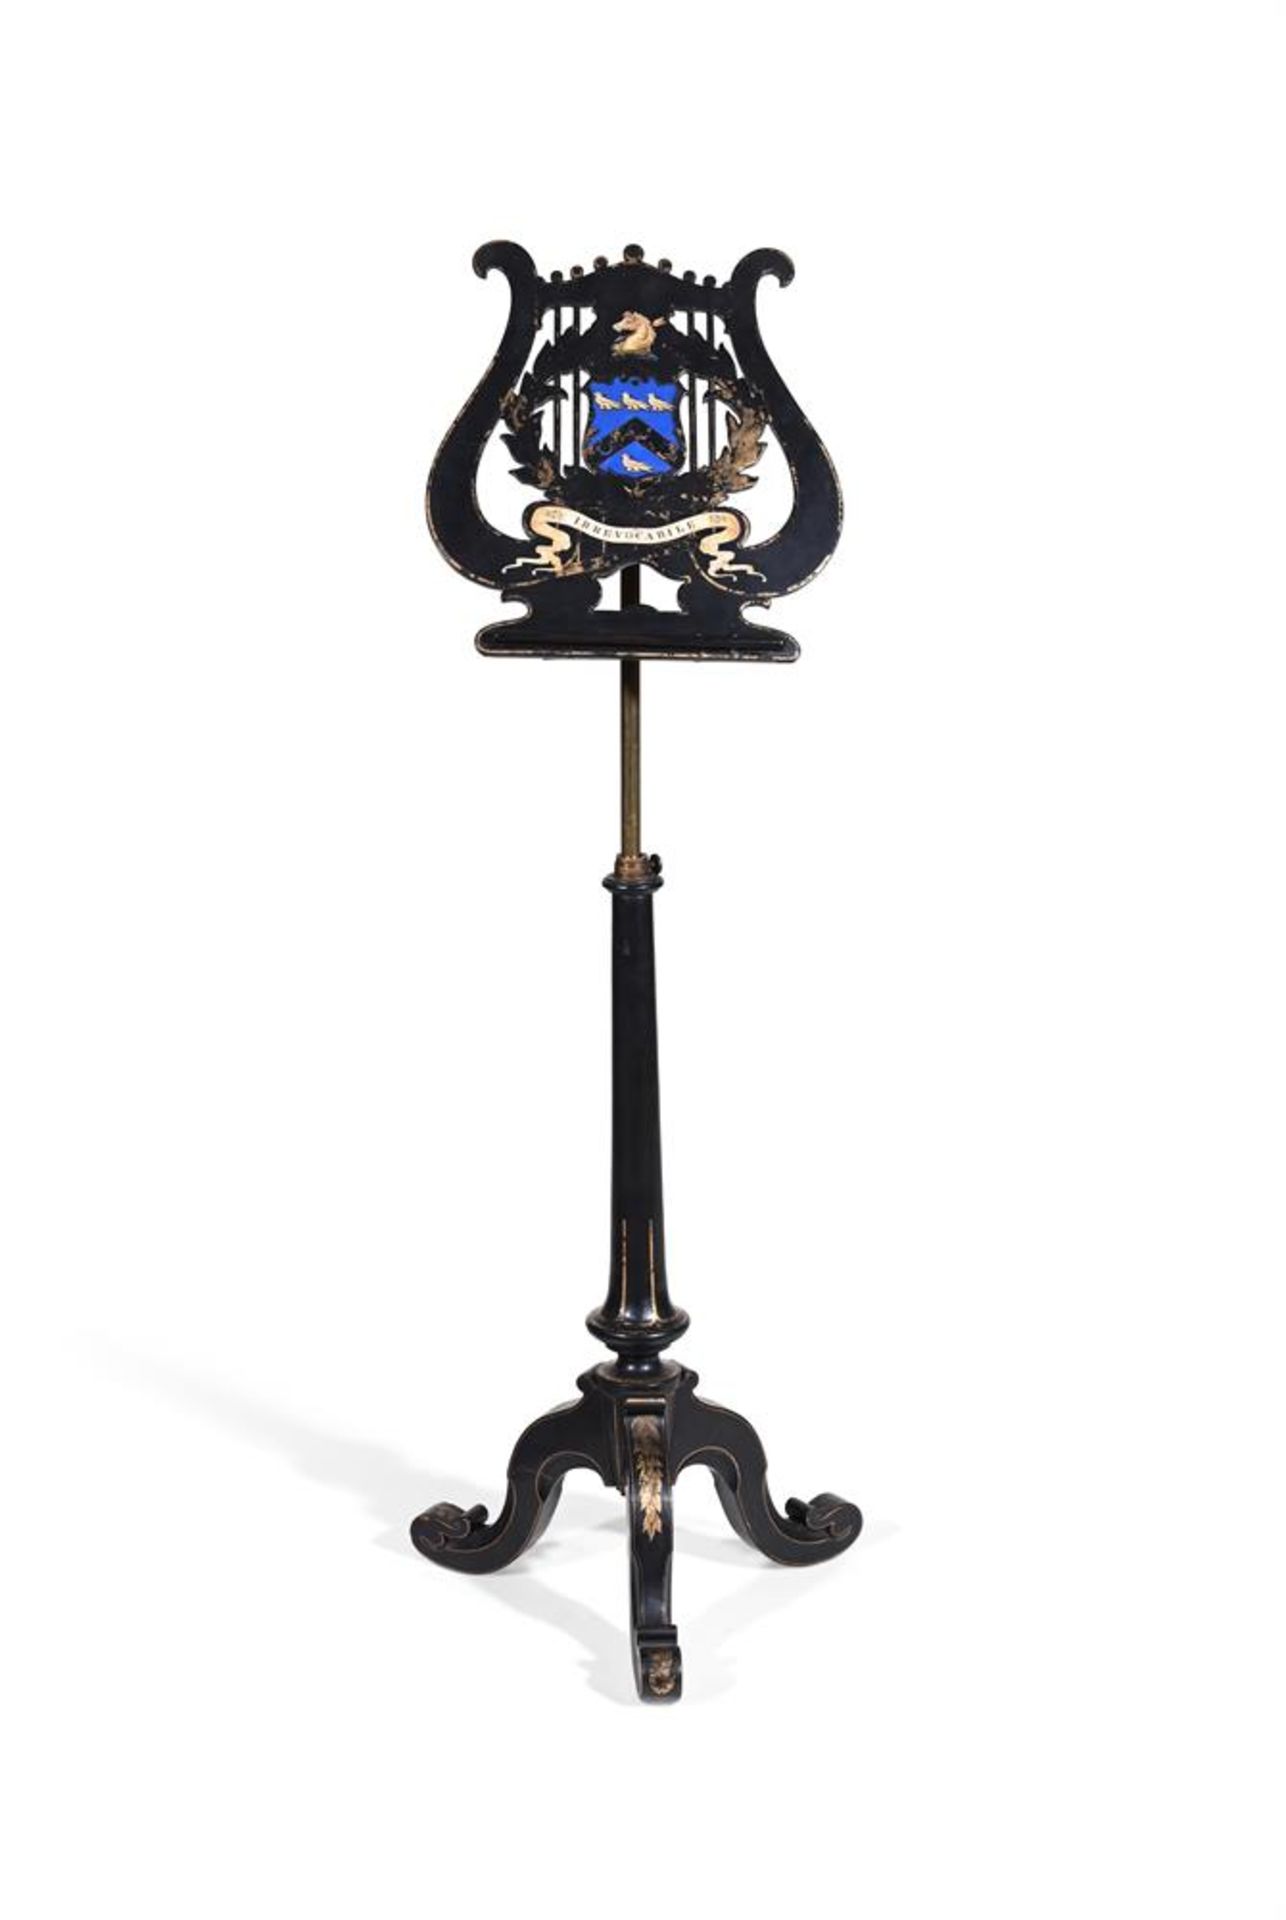 A VICTORIAN EBONISED AND POLYCHROME PAINTED ADJUSTABLE MUSIC STAND, LATE 19TH CENTURY